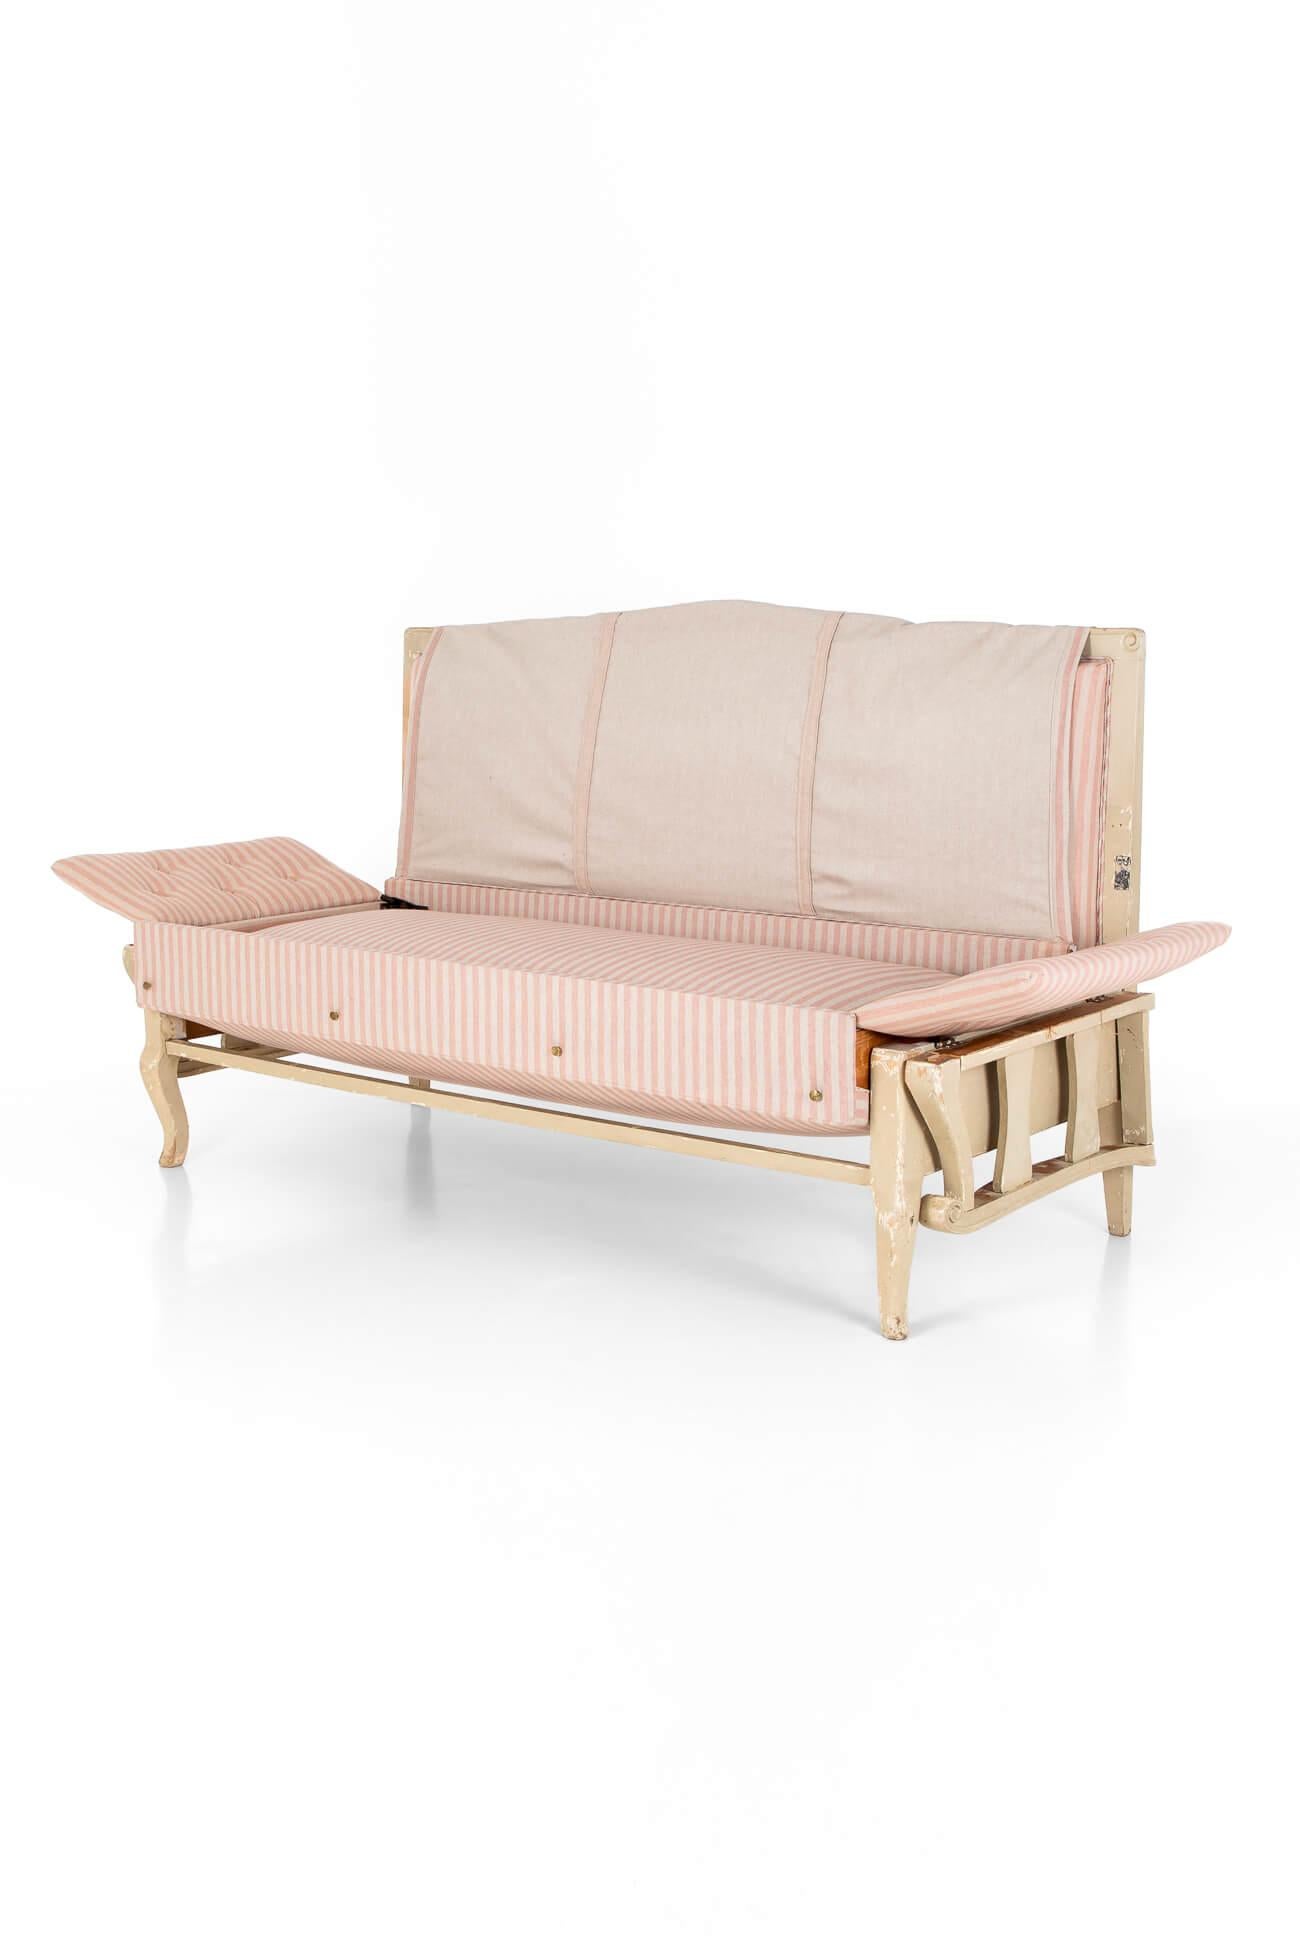 Gustavian Sofa in Pink Linen For Sale 5